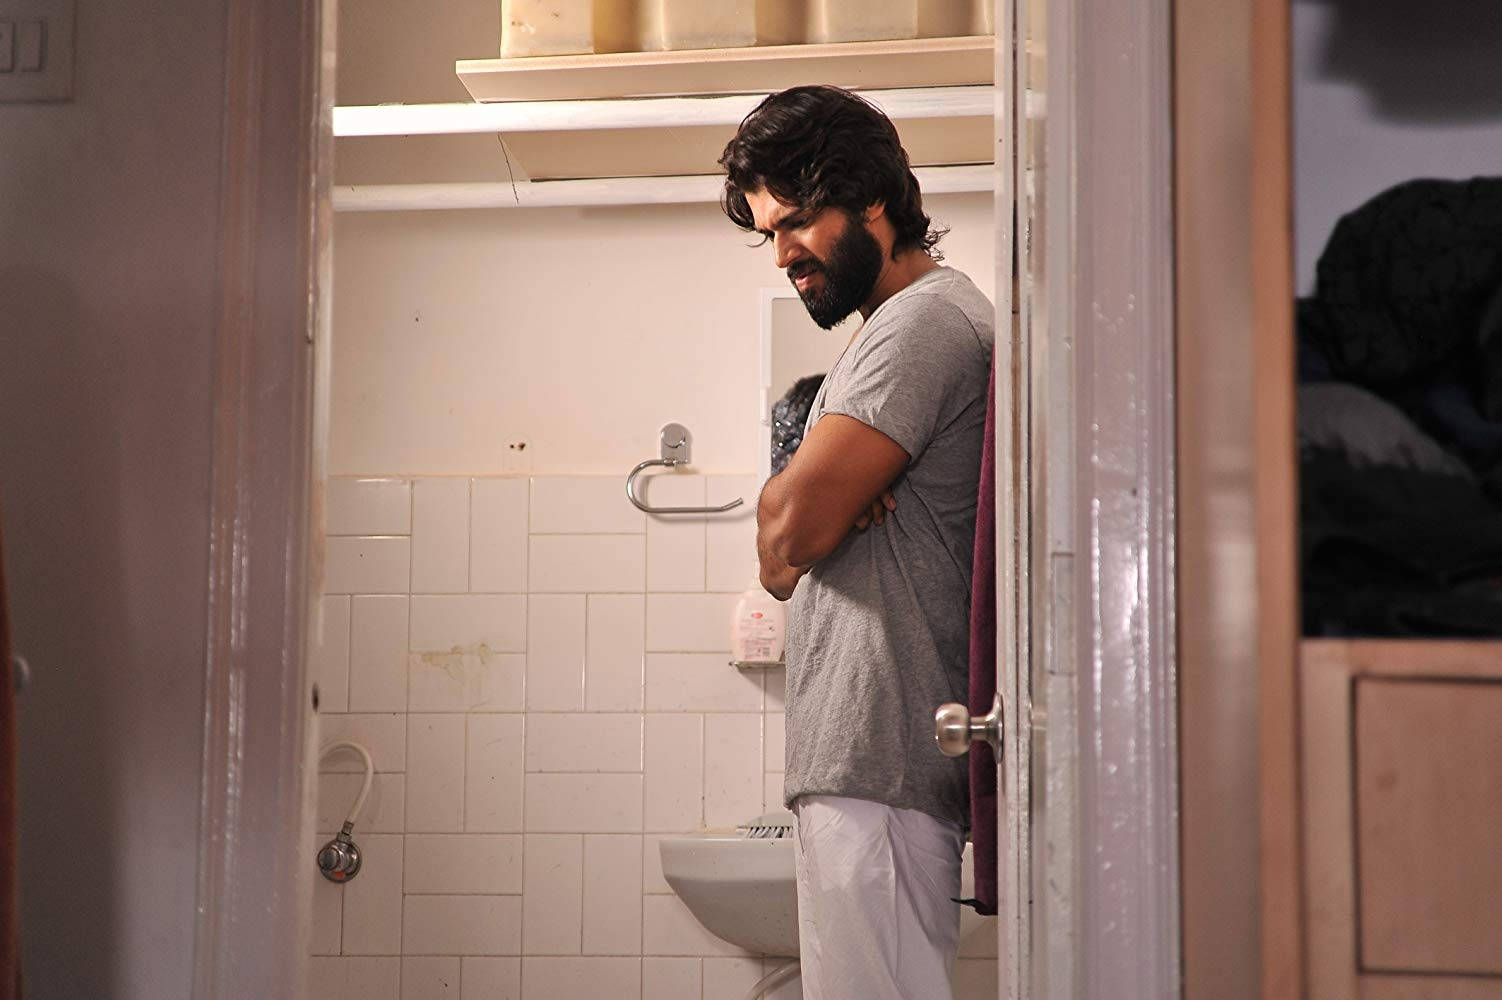 Intense Portrayal Of Arjun Reddy In Thought-provoking Scene Background